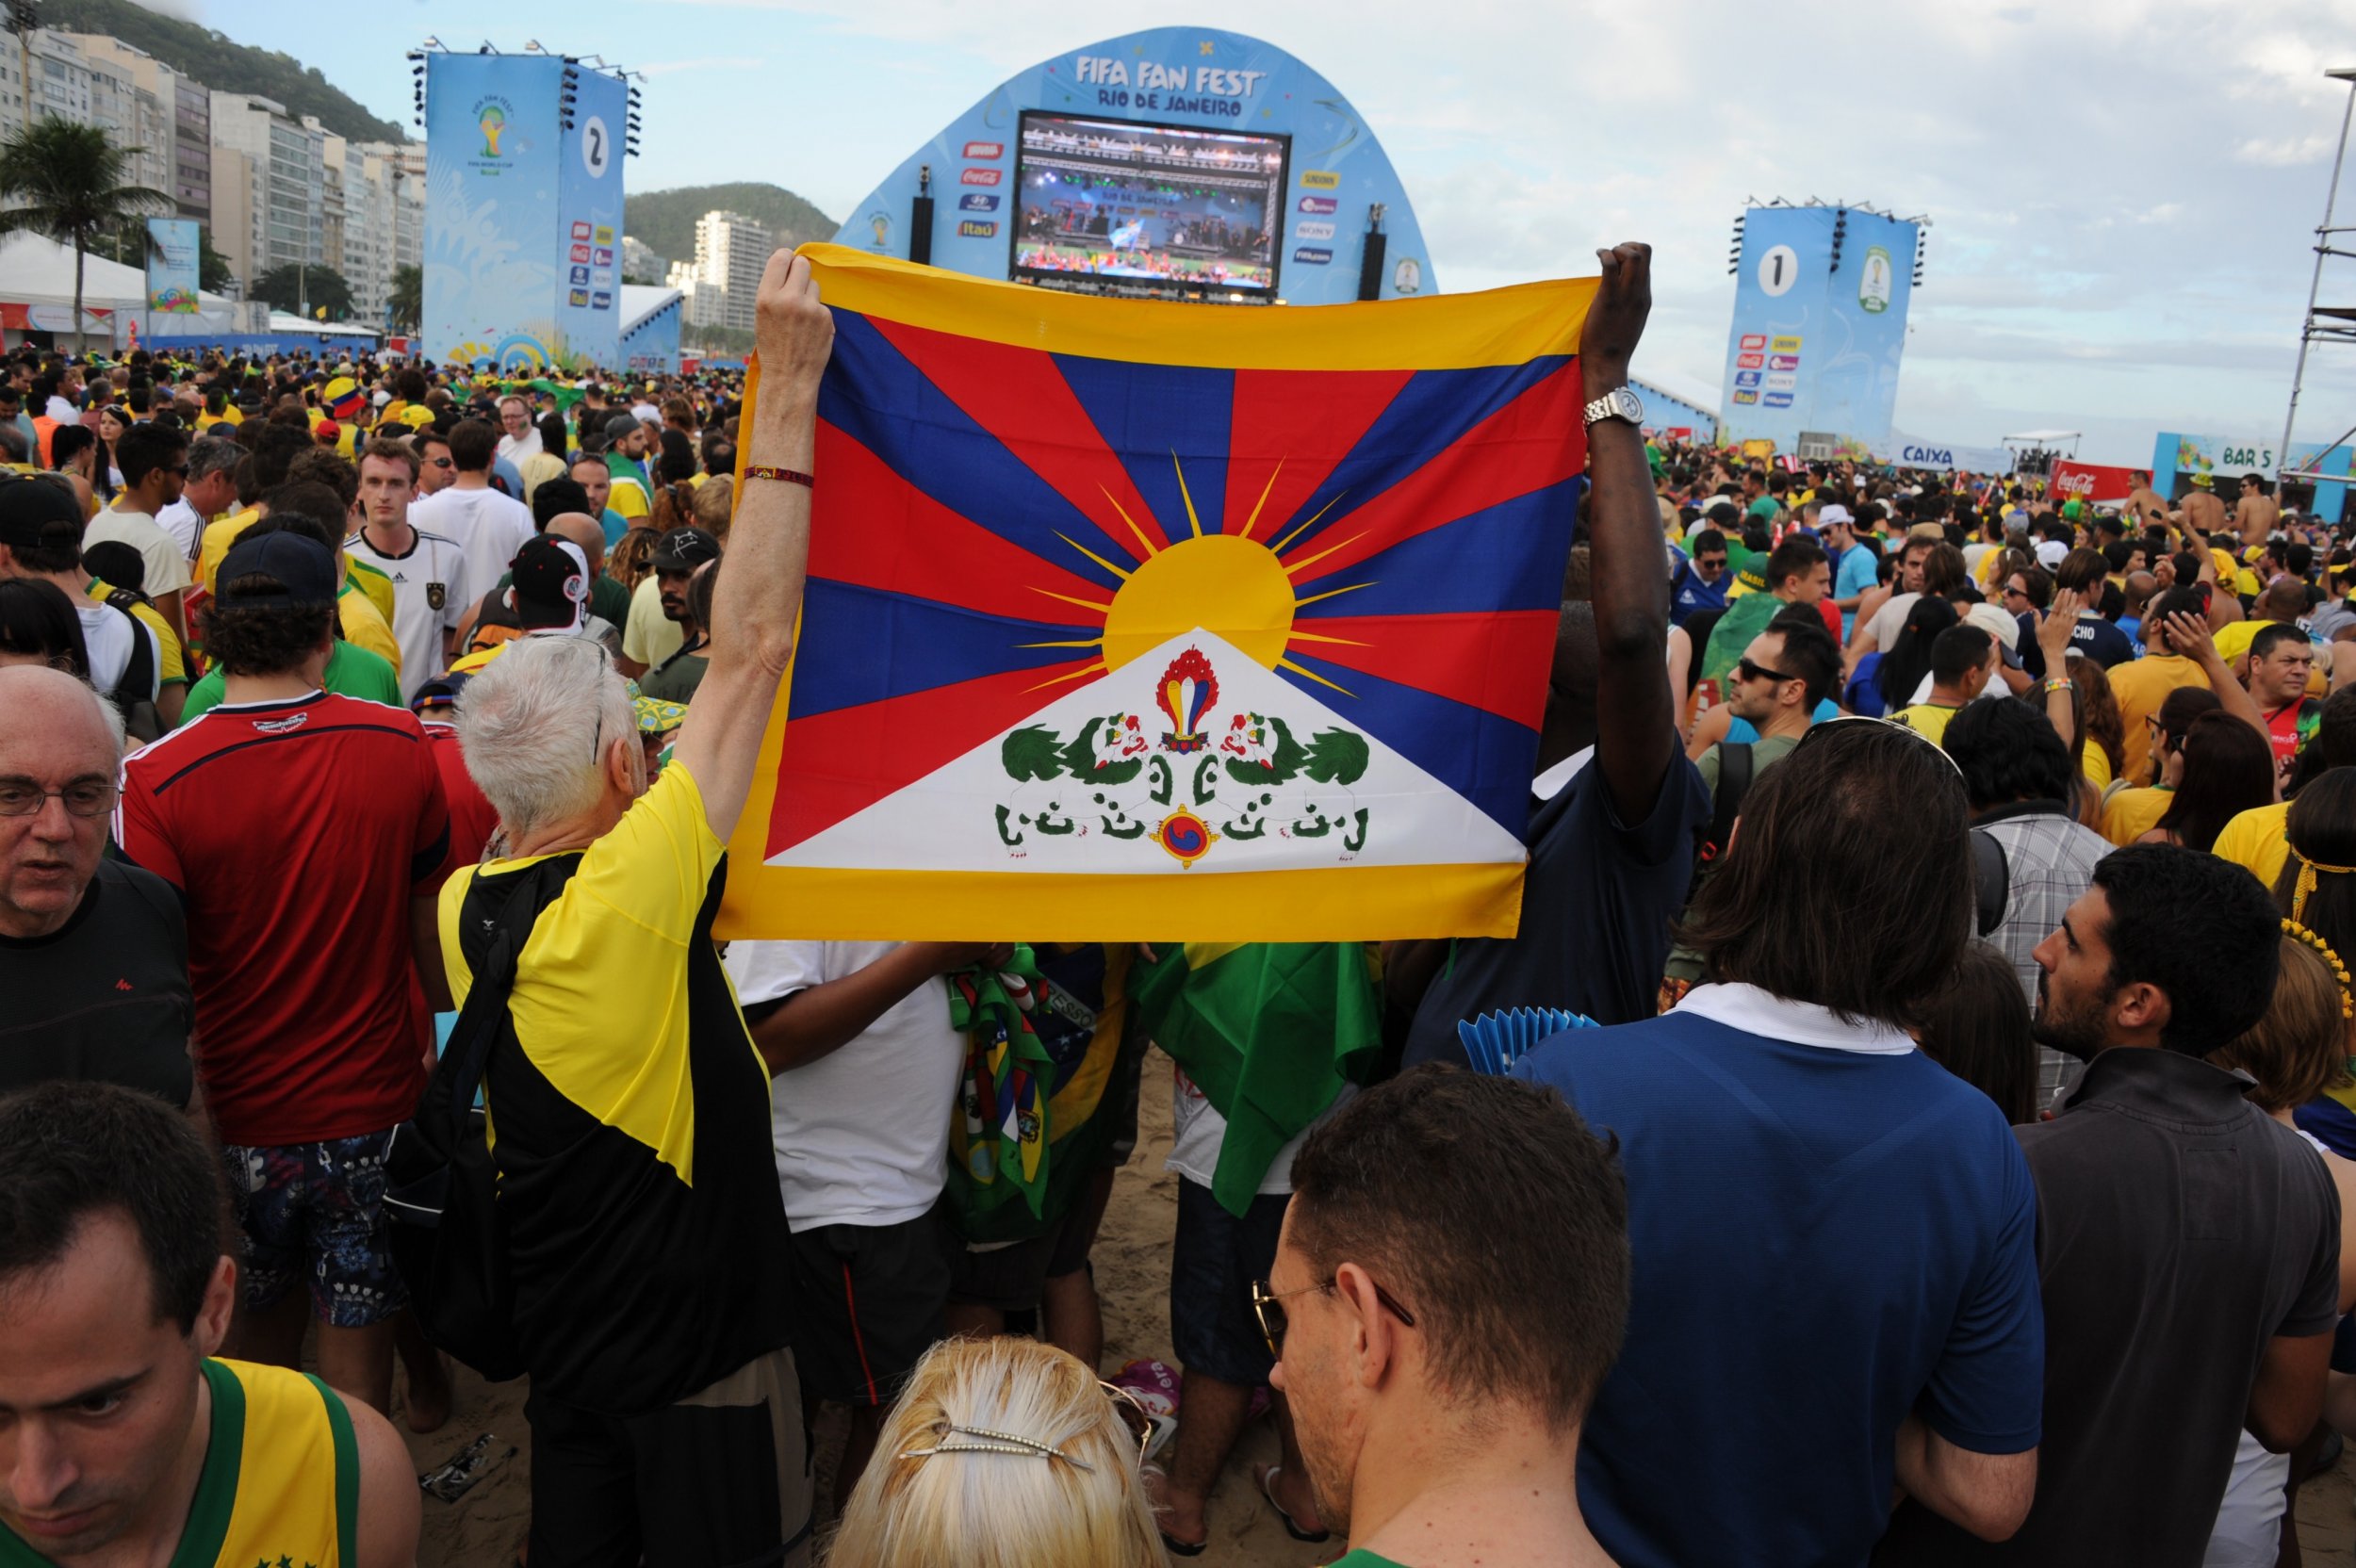 Supporters hold a Tibet flag at the Fan Fest in Rio de Janeiro